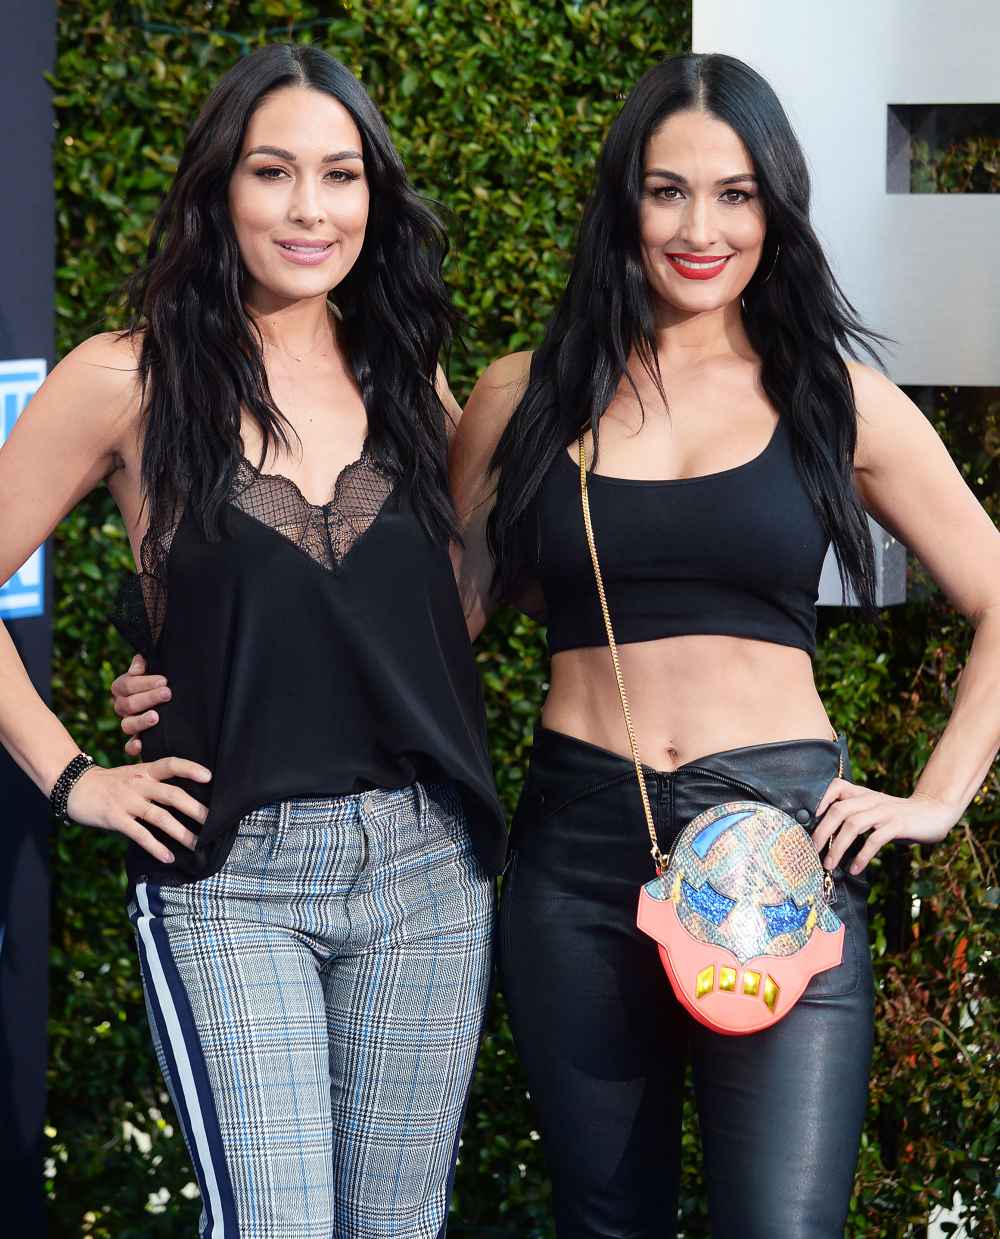 Nikki and Brie Bella To Be Inducted Into WWE Hall of Fame